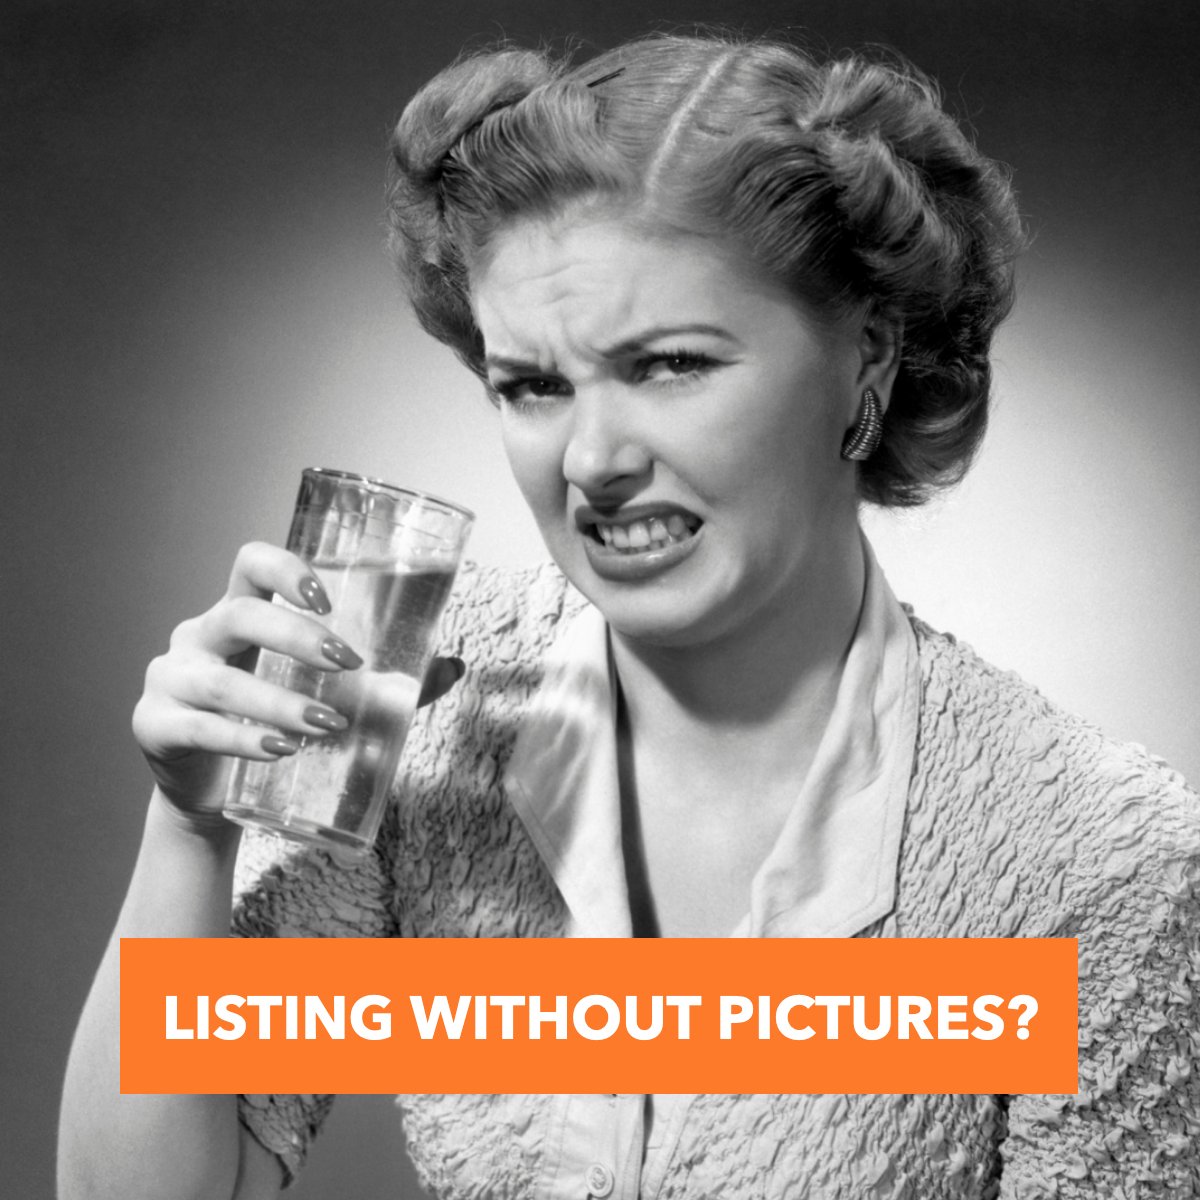 Listing with no pictures? 😱

YIKES. 

#listing    #listings    #pictures    #housepictures    #selling    #realestate    #realestatehumor    #realestatememe
#schy #schyrealtor #Realestateinvesting #fresno #fresnorealestate #buyrealestate #californiarealestate